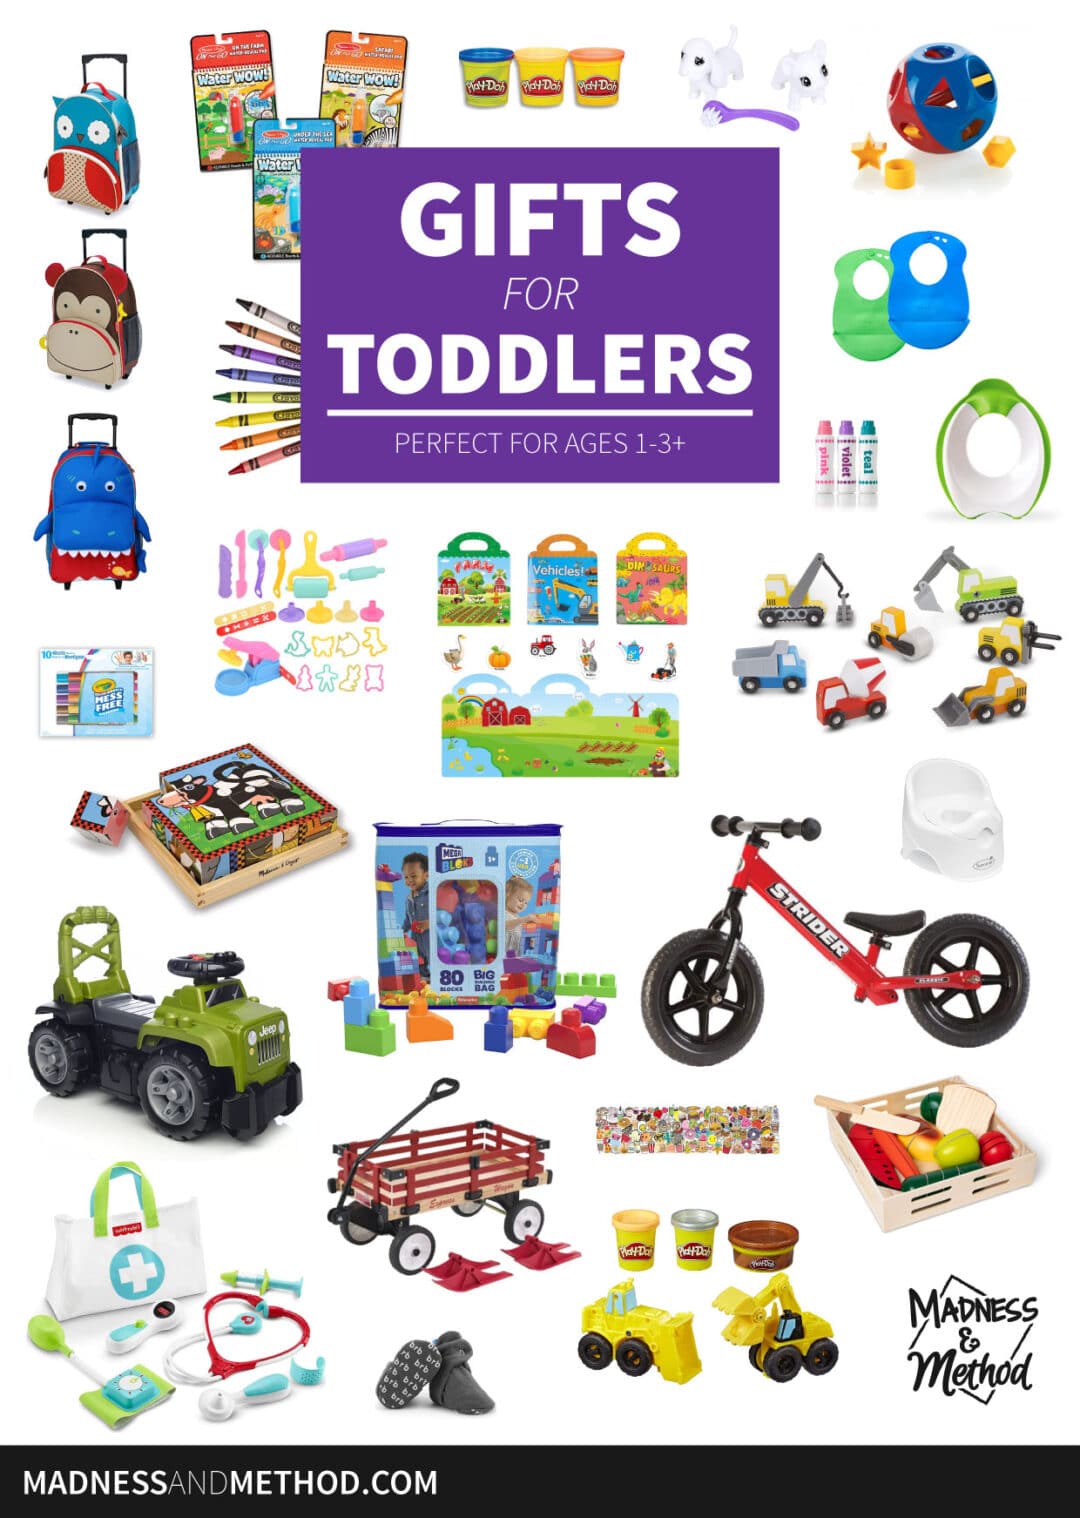 Gifts for Toddlers | Madness & Method